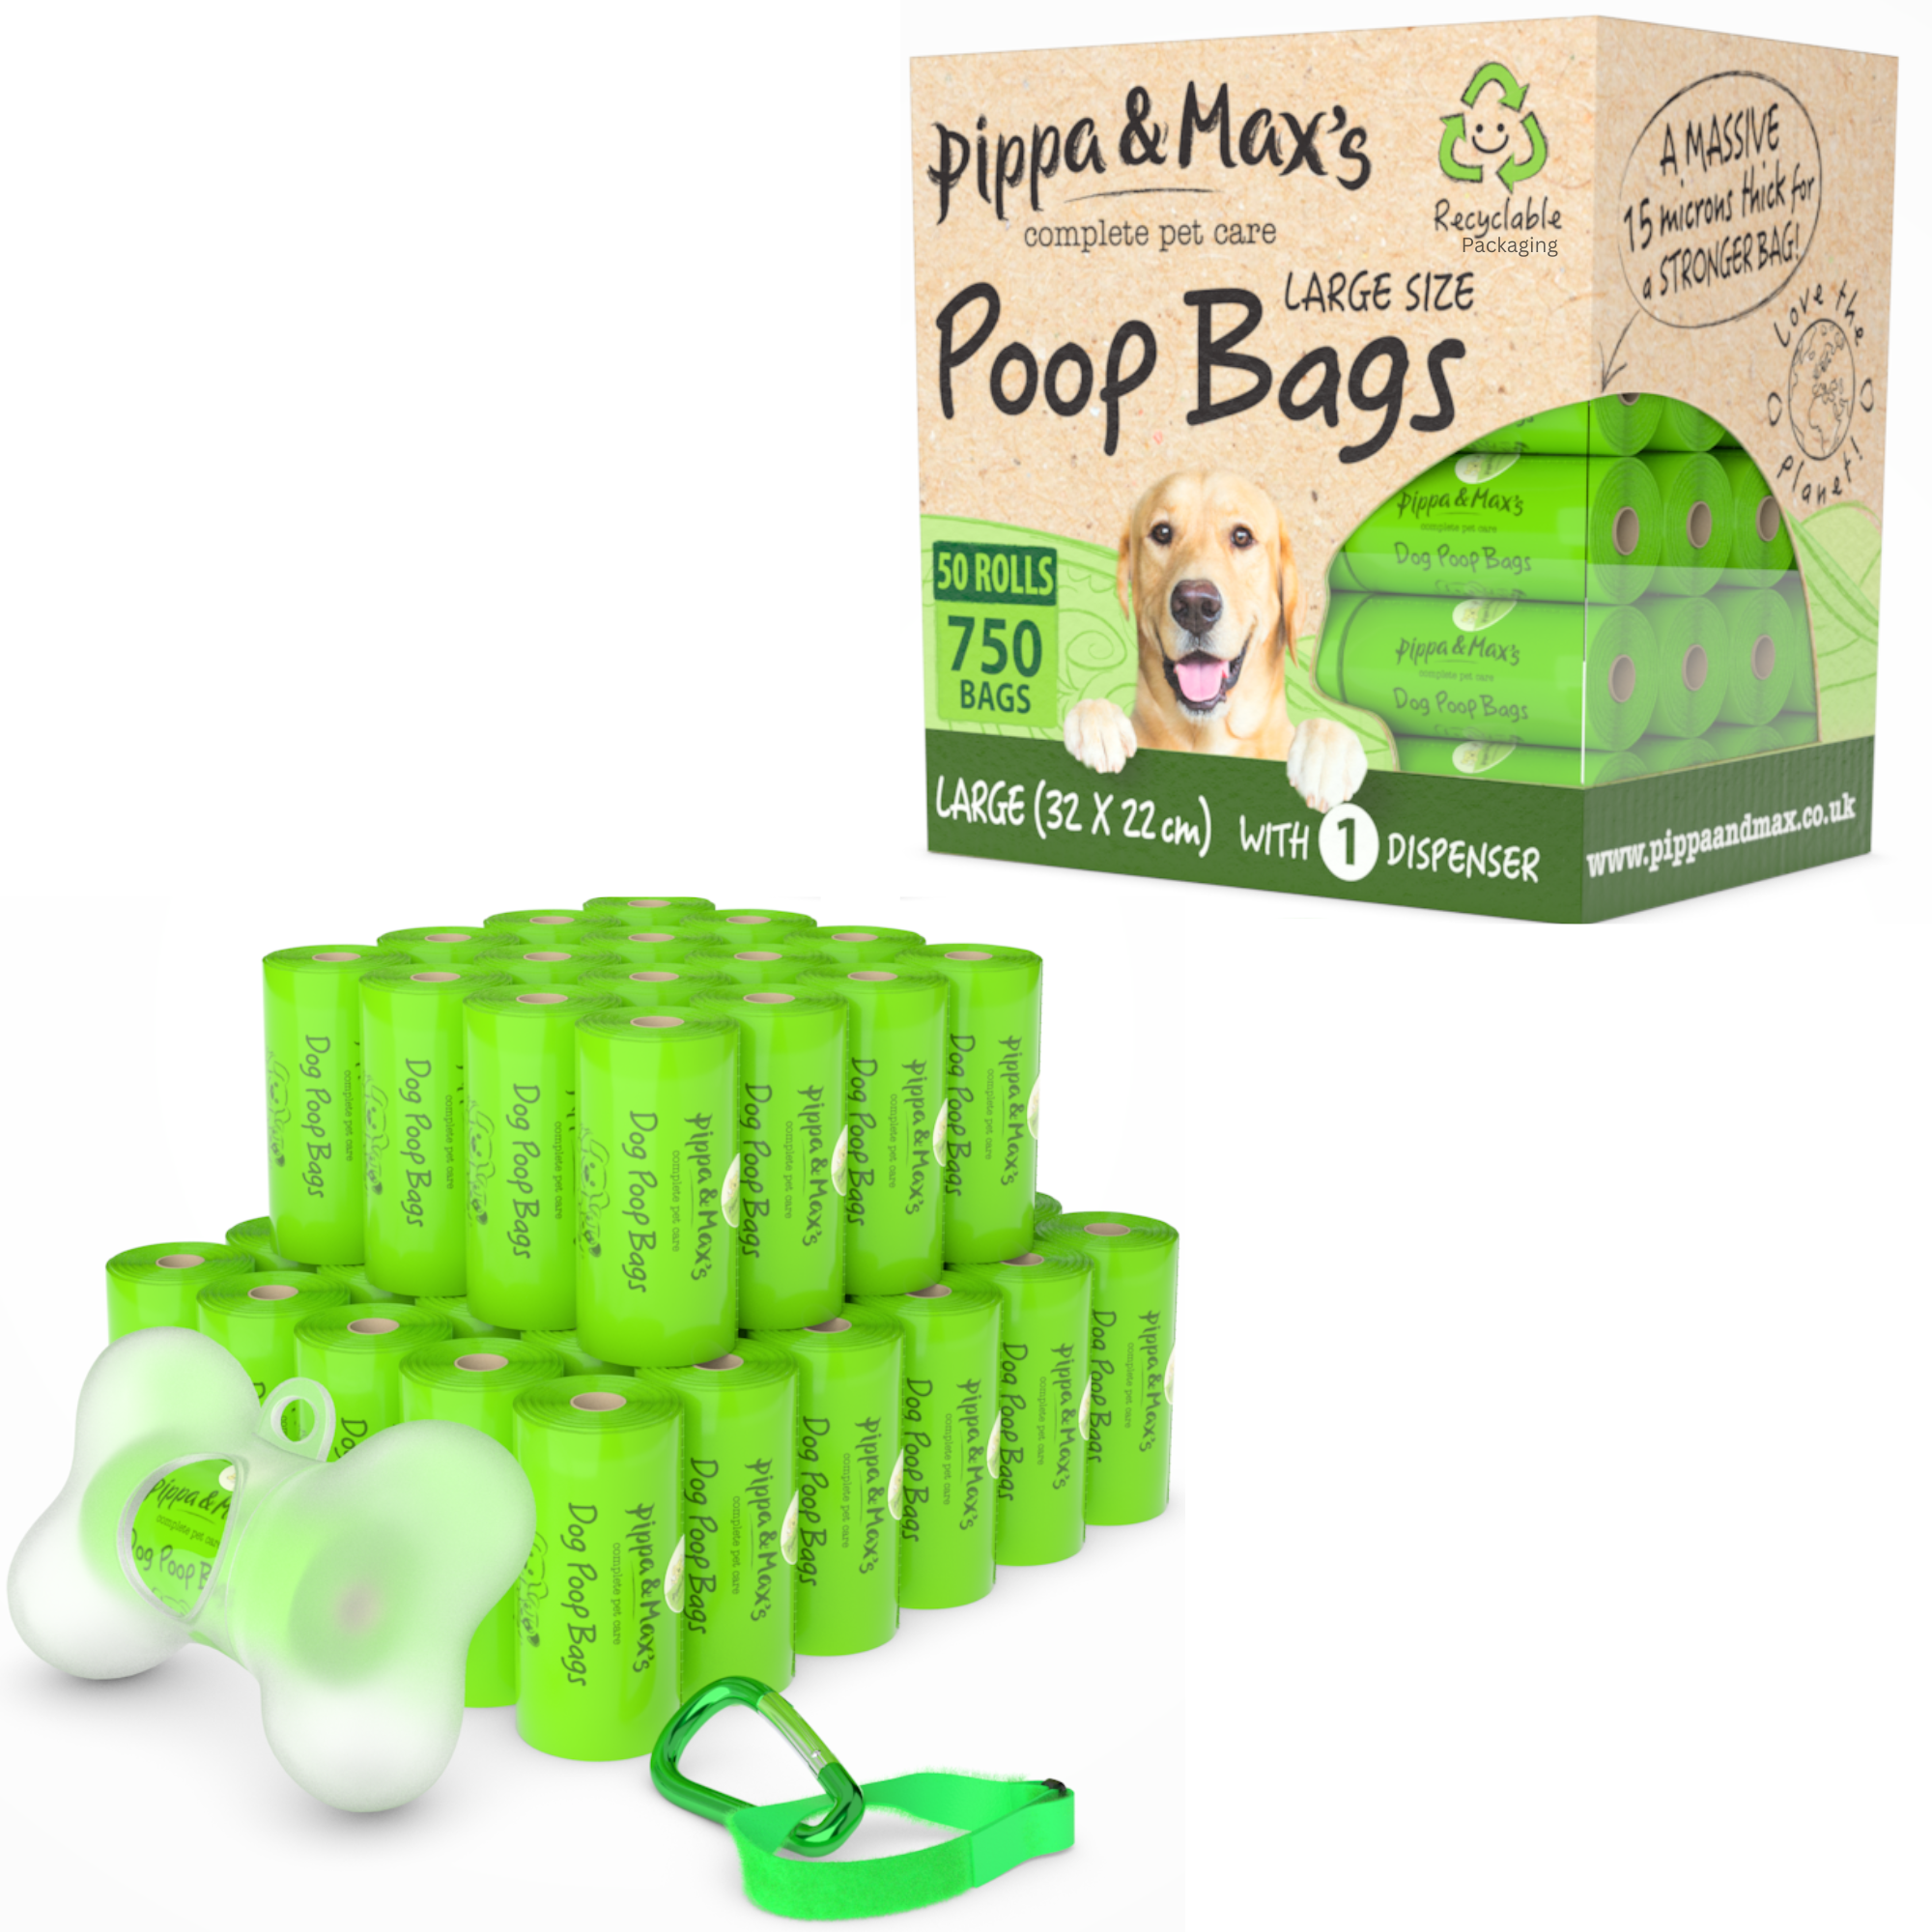 Thick & Durable Dog Poop Bags by Pippa & Max (750) - Heavy-Duty Pet Waste Bags for Dog Walking, Leak-Proof & Large Size